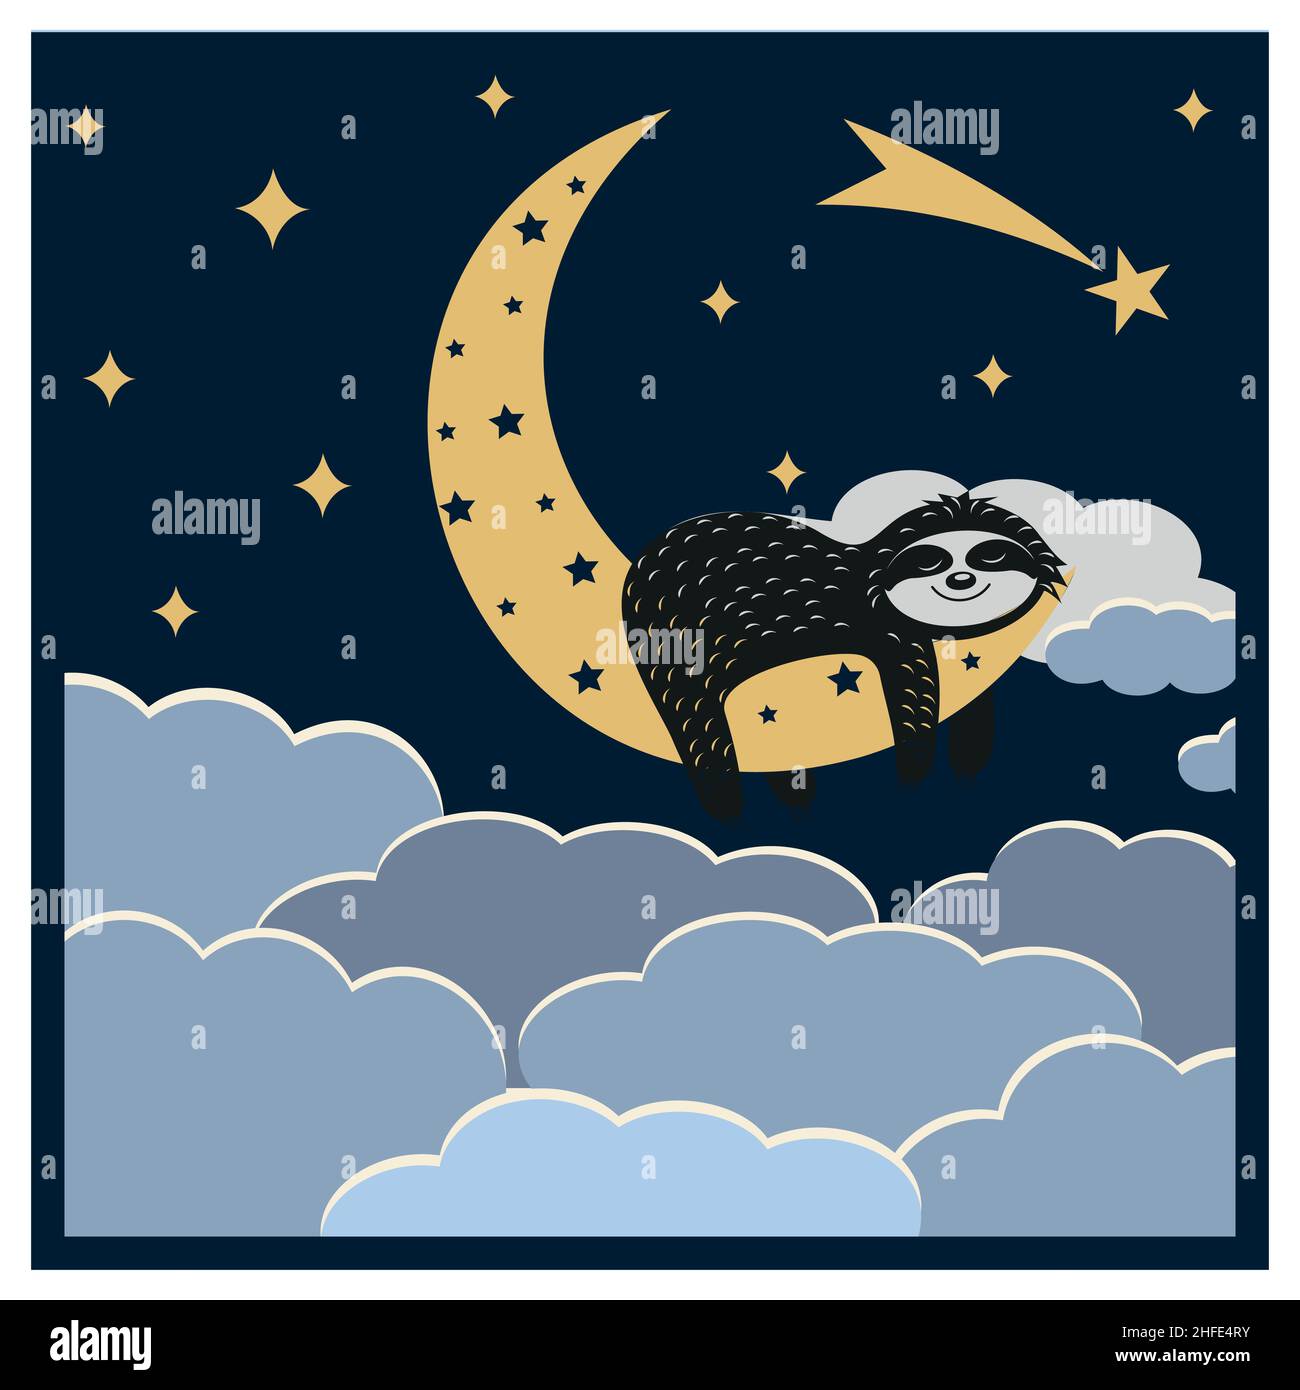 Sloth sleeps on the moon among the clouds, made by layers paper cutting 3d application Stock Vector